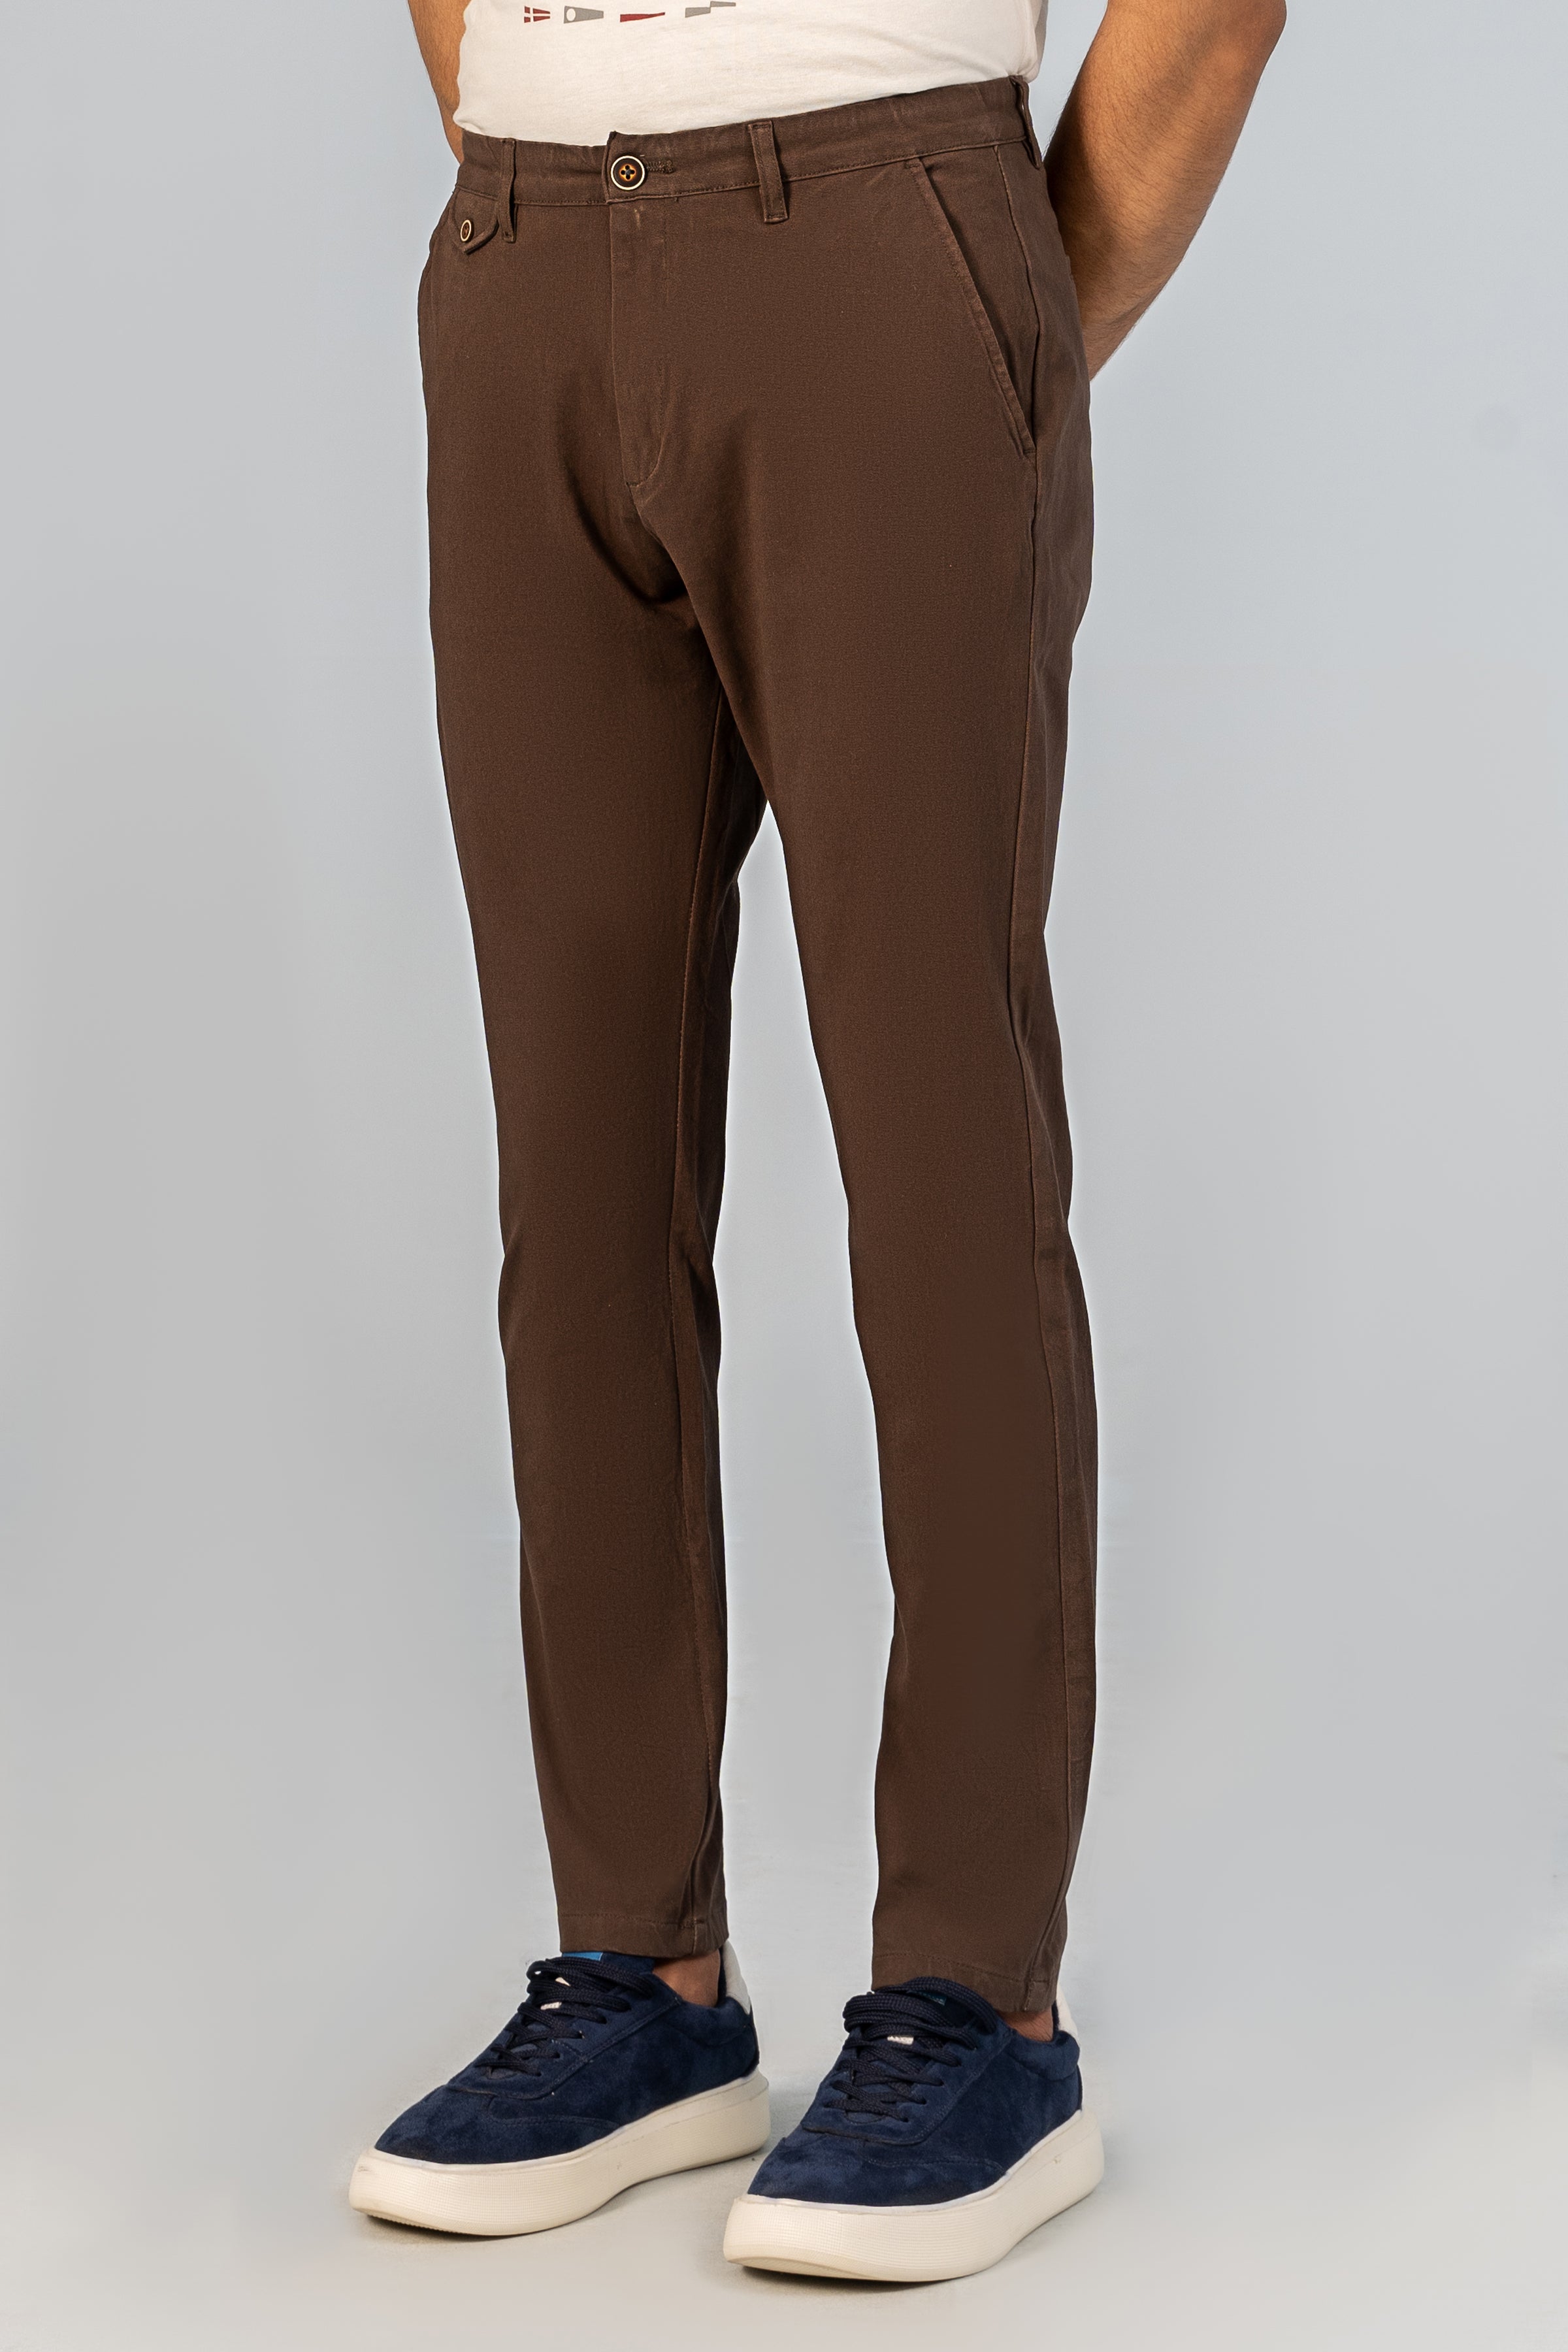 CASUAL PANT CROSS POCKET BI-STRETCH CHOCLATE BROWN - Charcoal Clothing